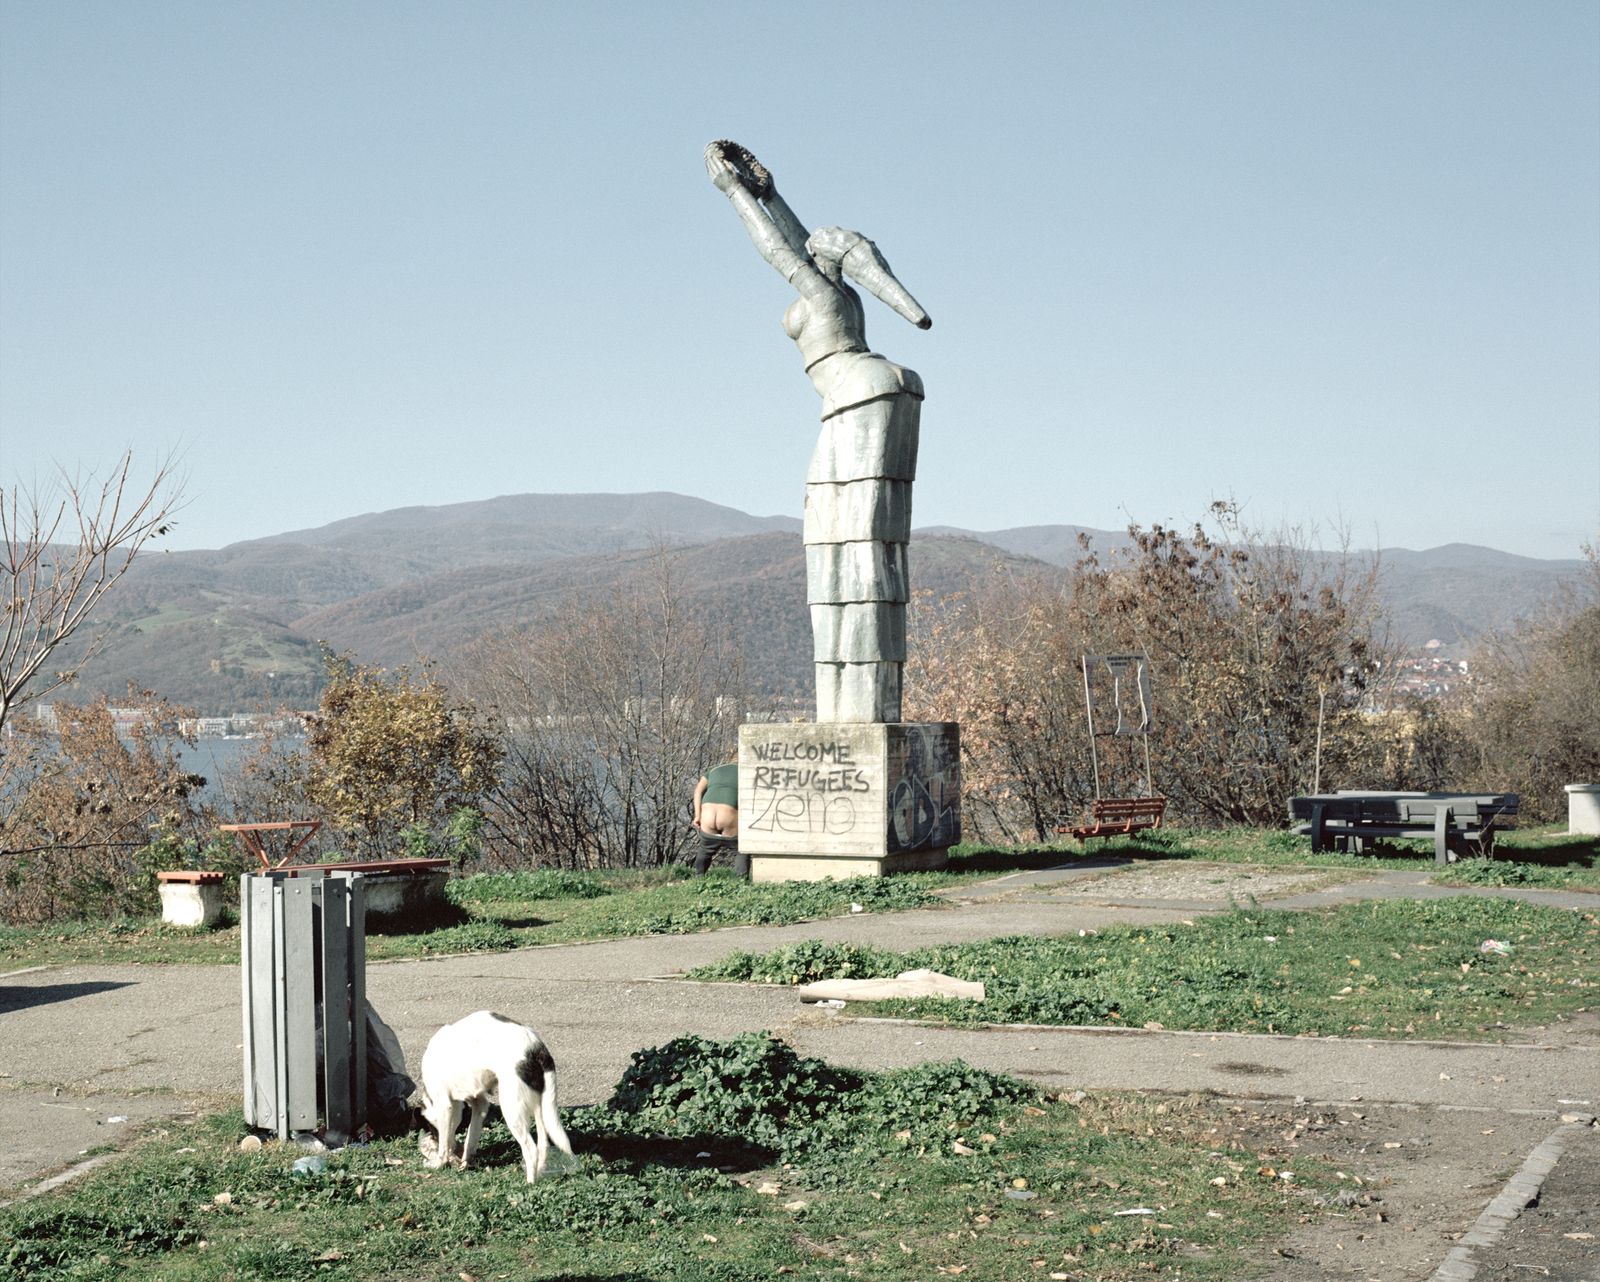 © Tommaso Rada - Romania, Orsova. February 2016. A communist style monument with a wrote welcoming refugees.